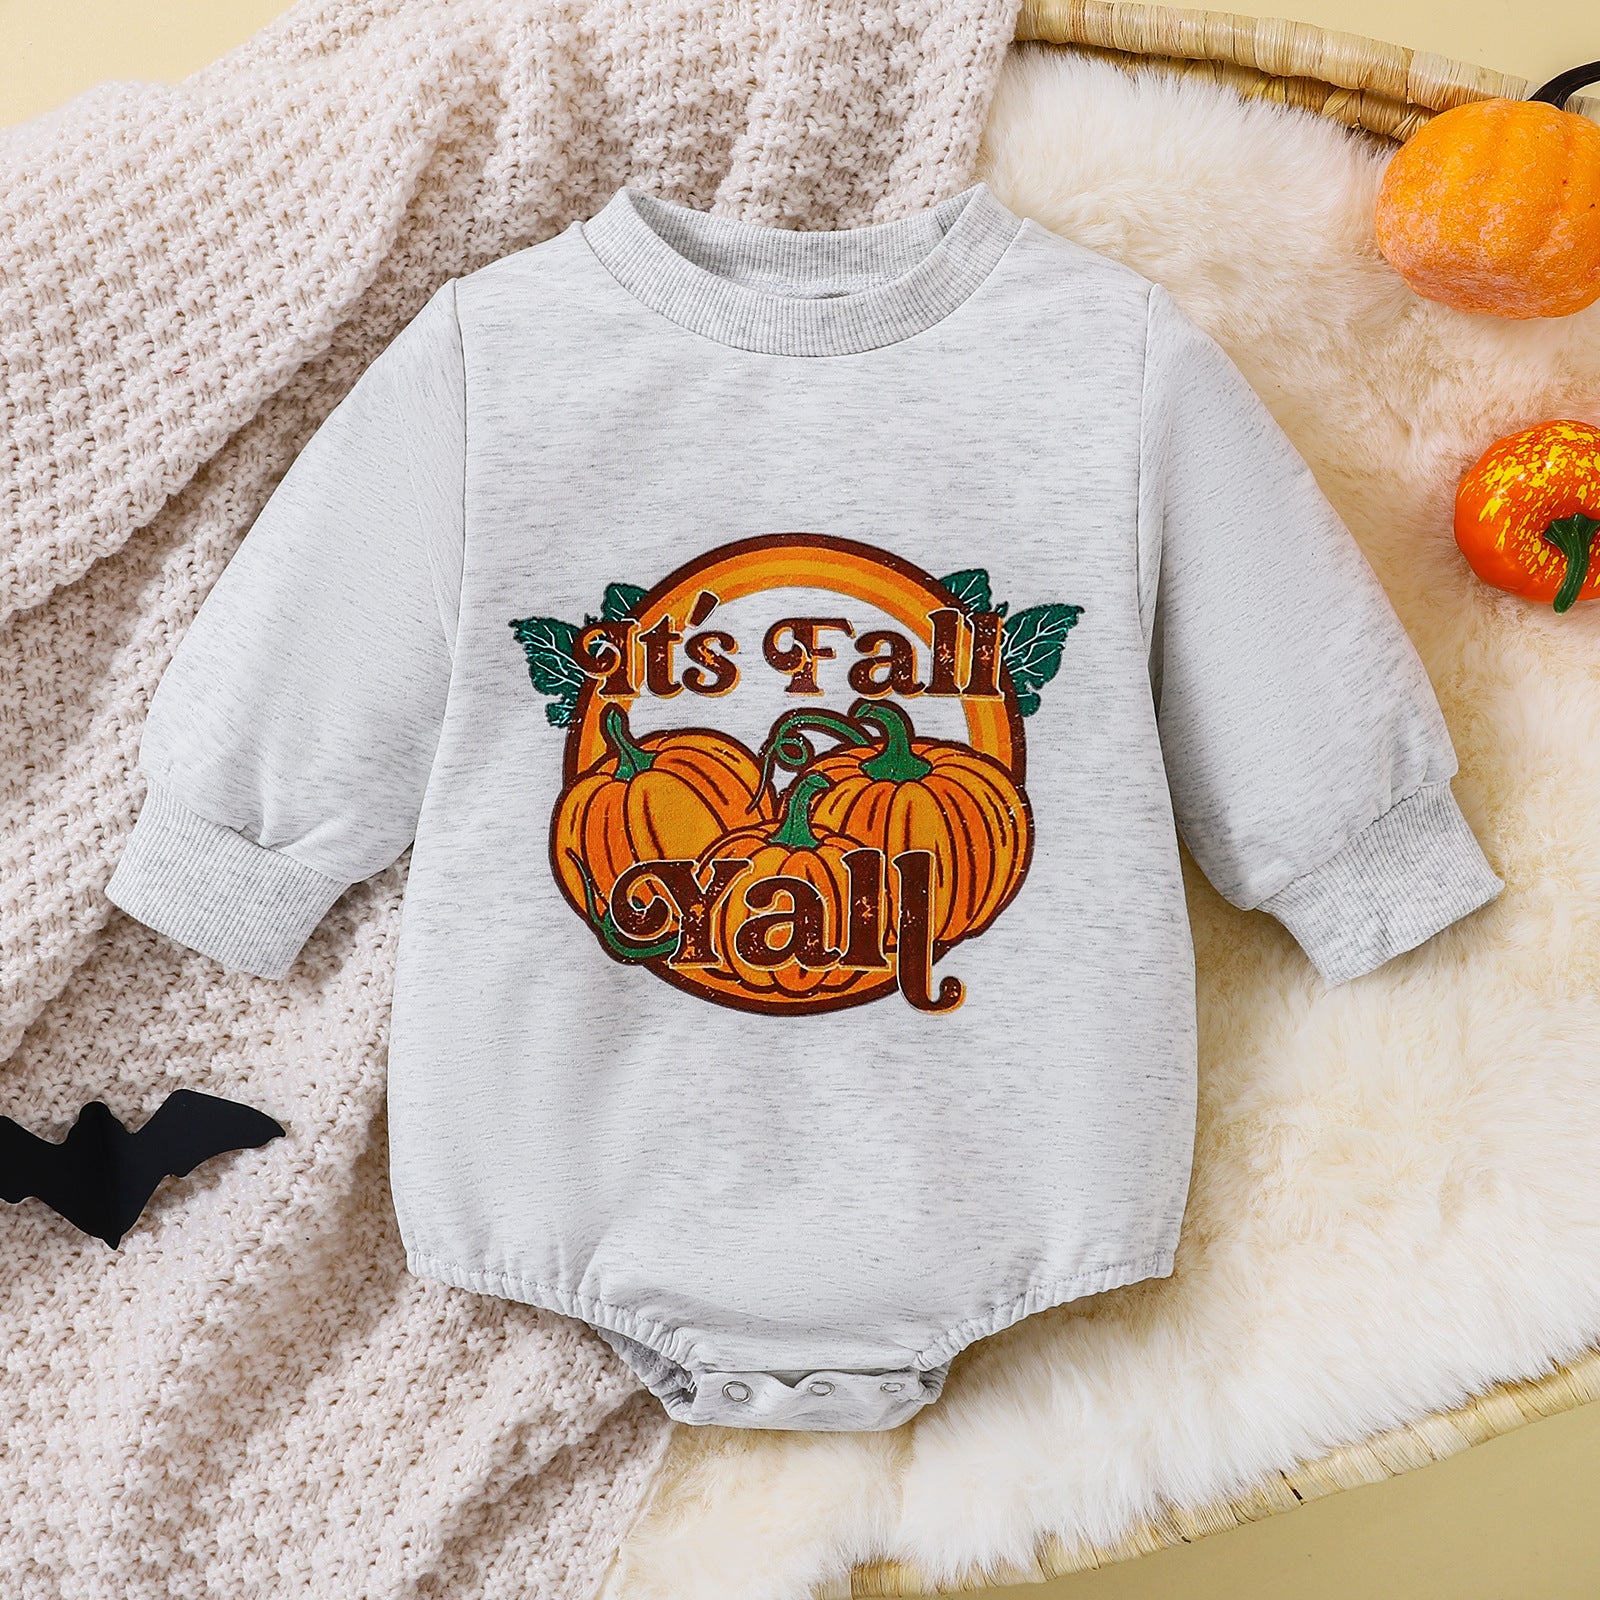 Celebrate Halloween with Style and Personality - New Halloween Romper with Cute Personality